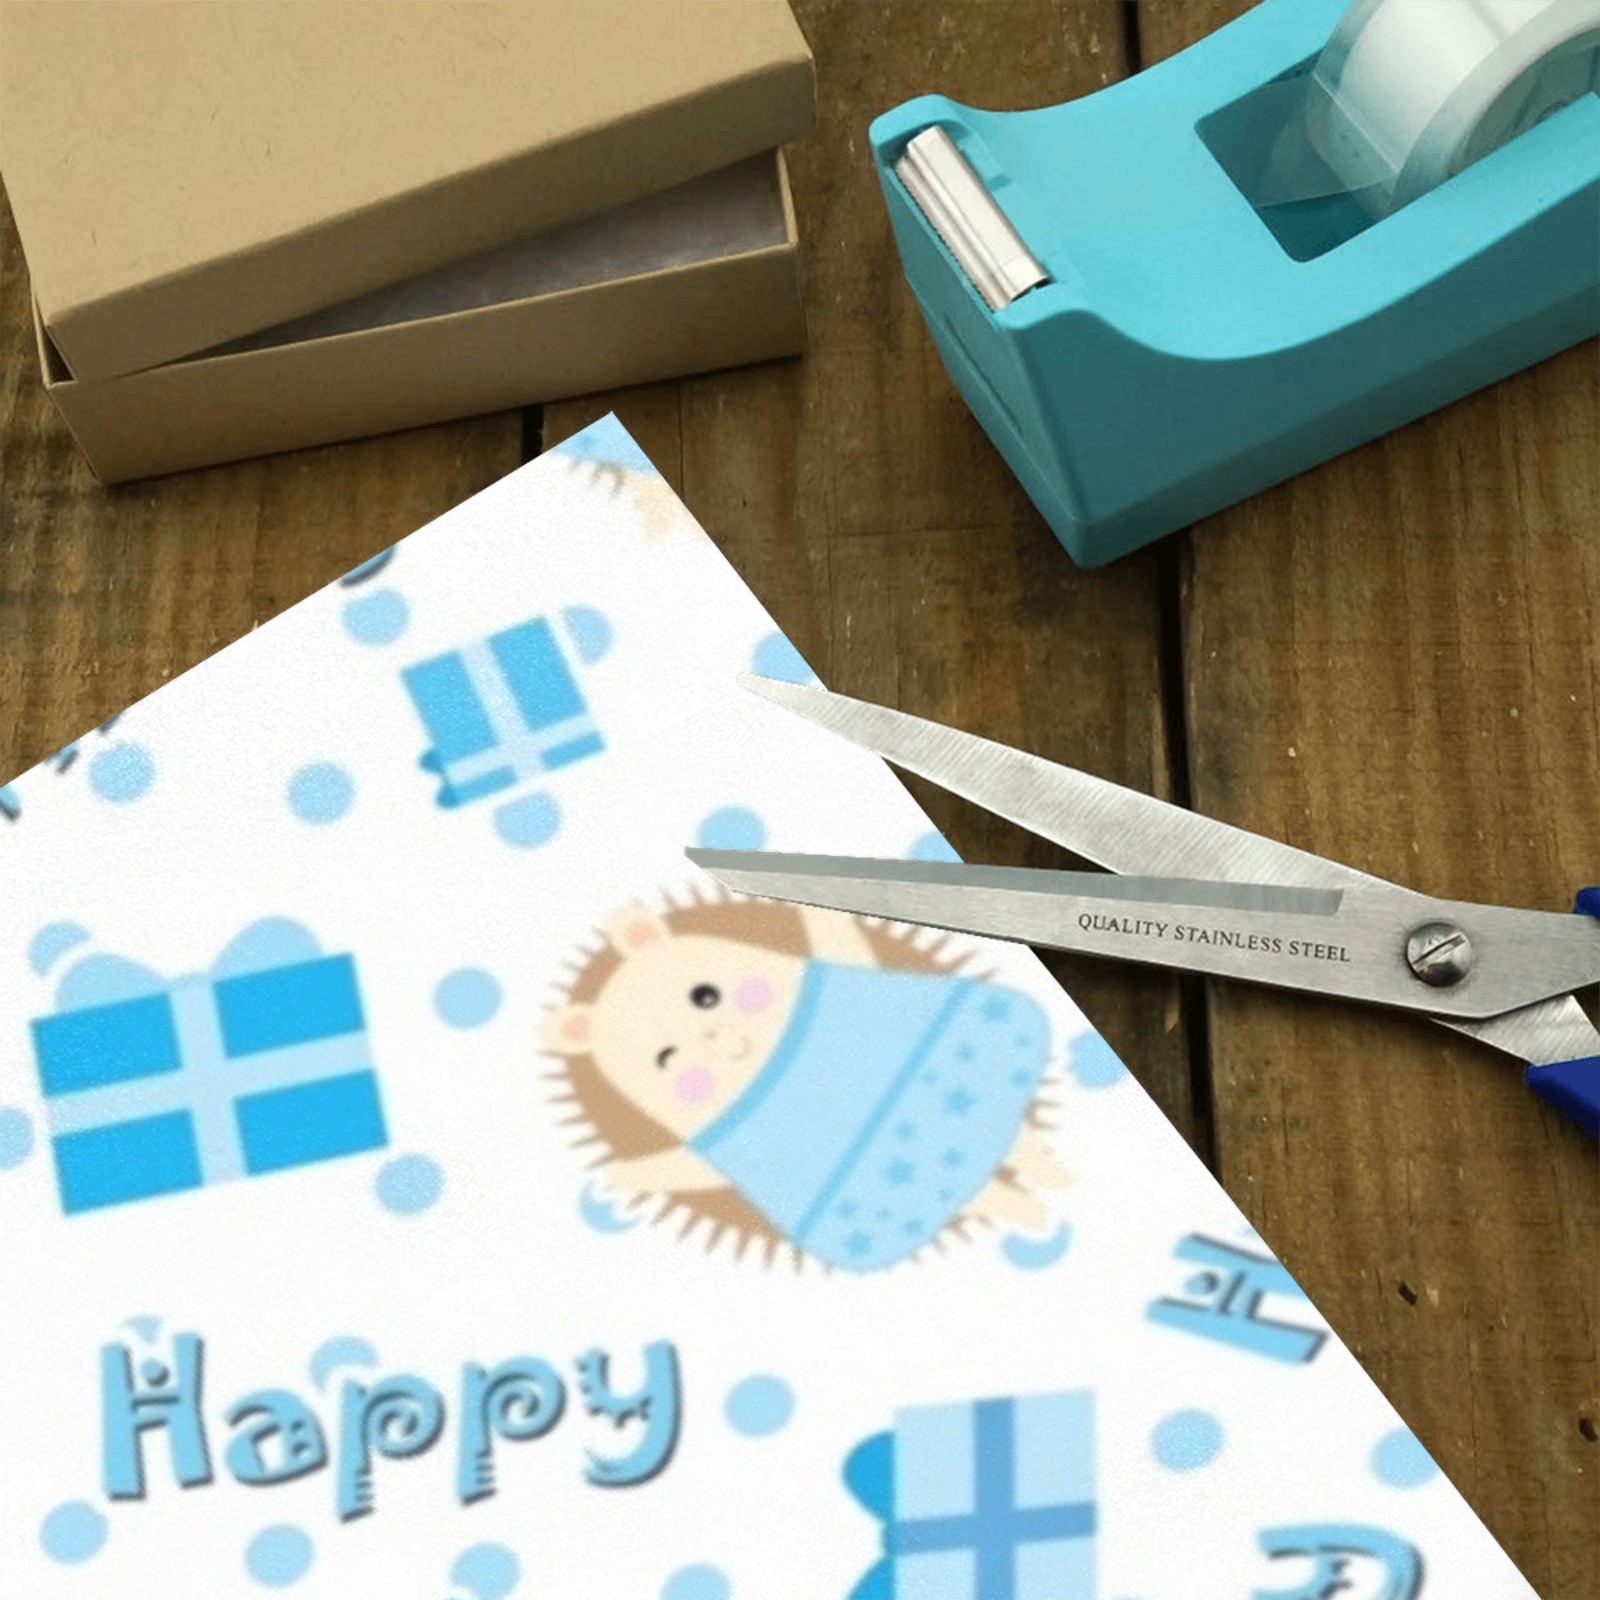 Happy Birthday Baby Boy Porcupine Gift Wrapping Paper 58"x 23" (1 Roll)